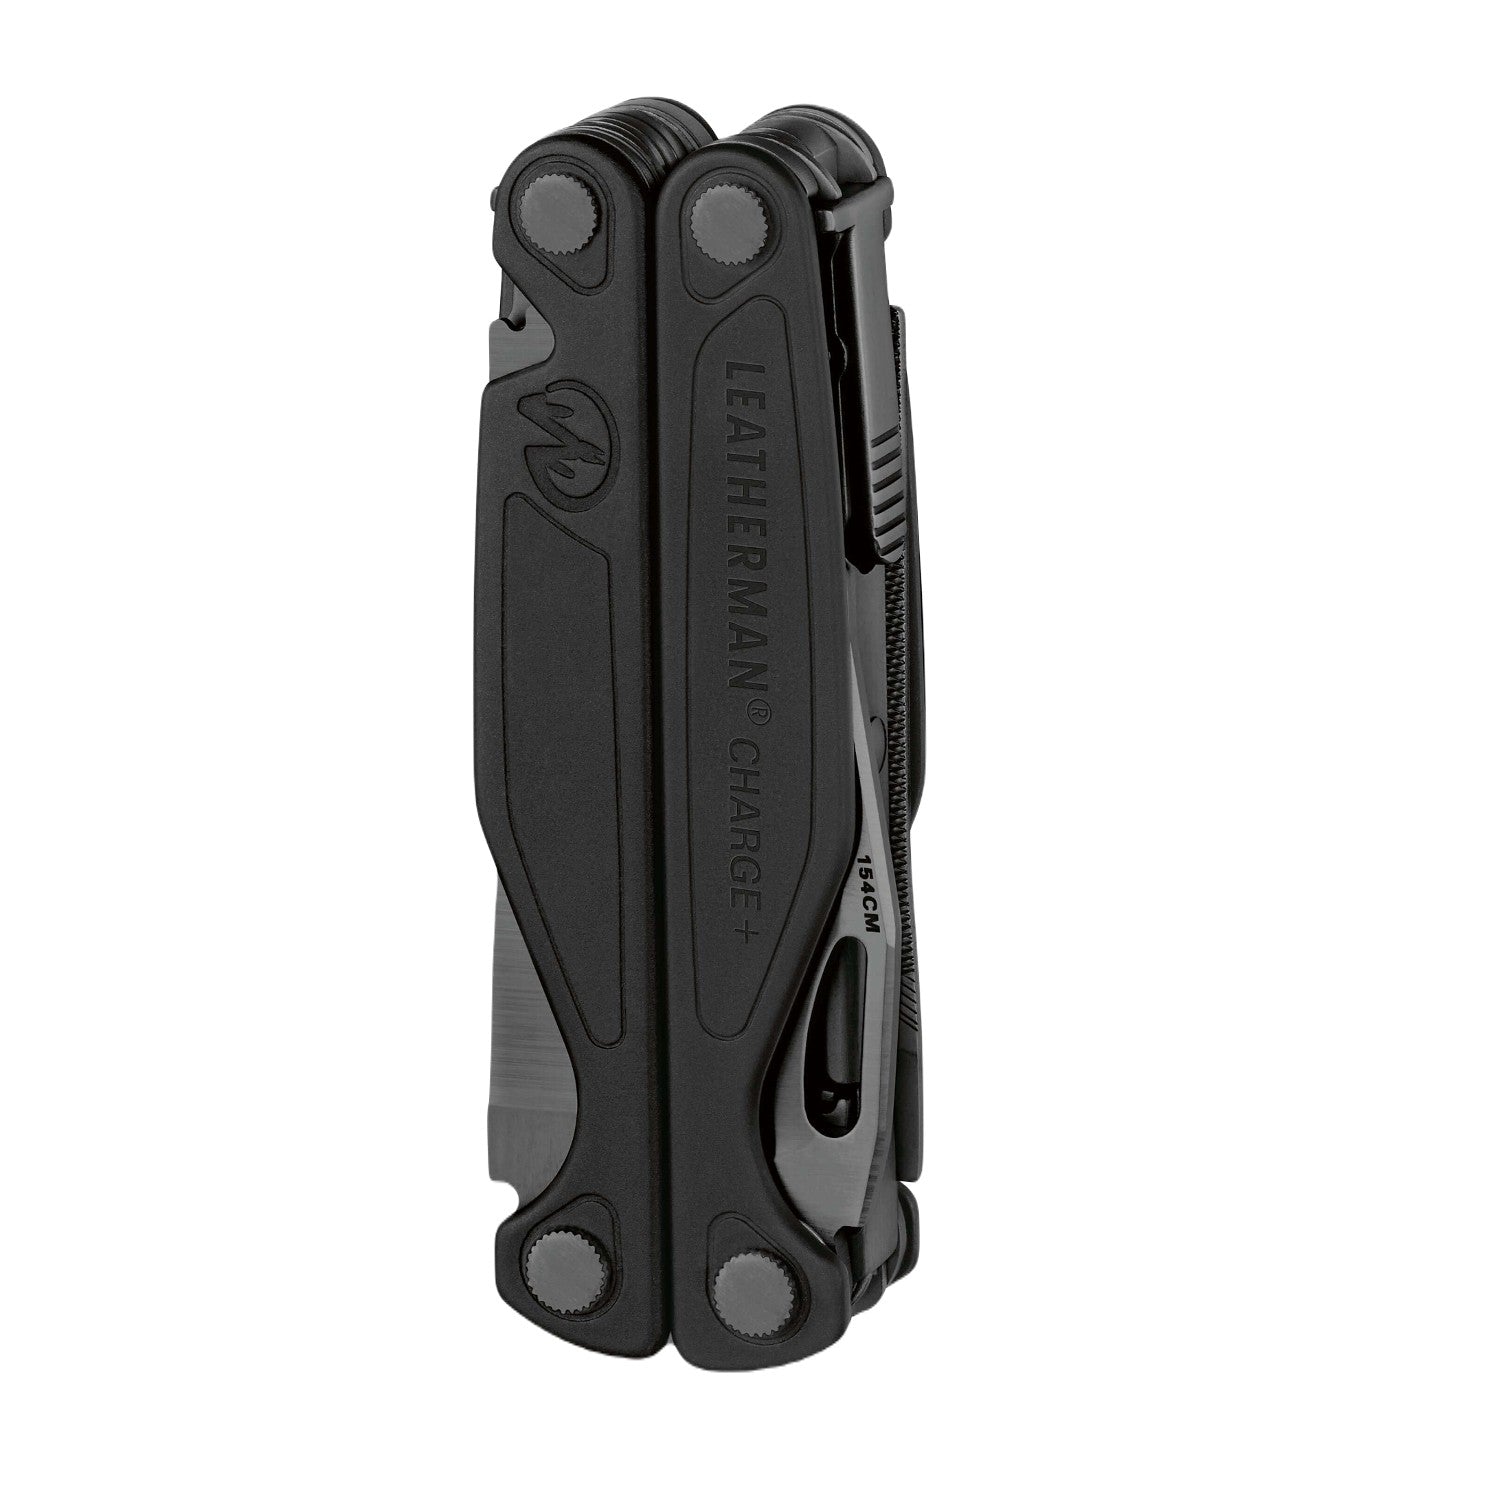 Leatherman Charge®+ Multi-Tool , in Black Oxide,